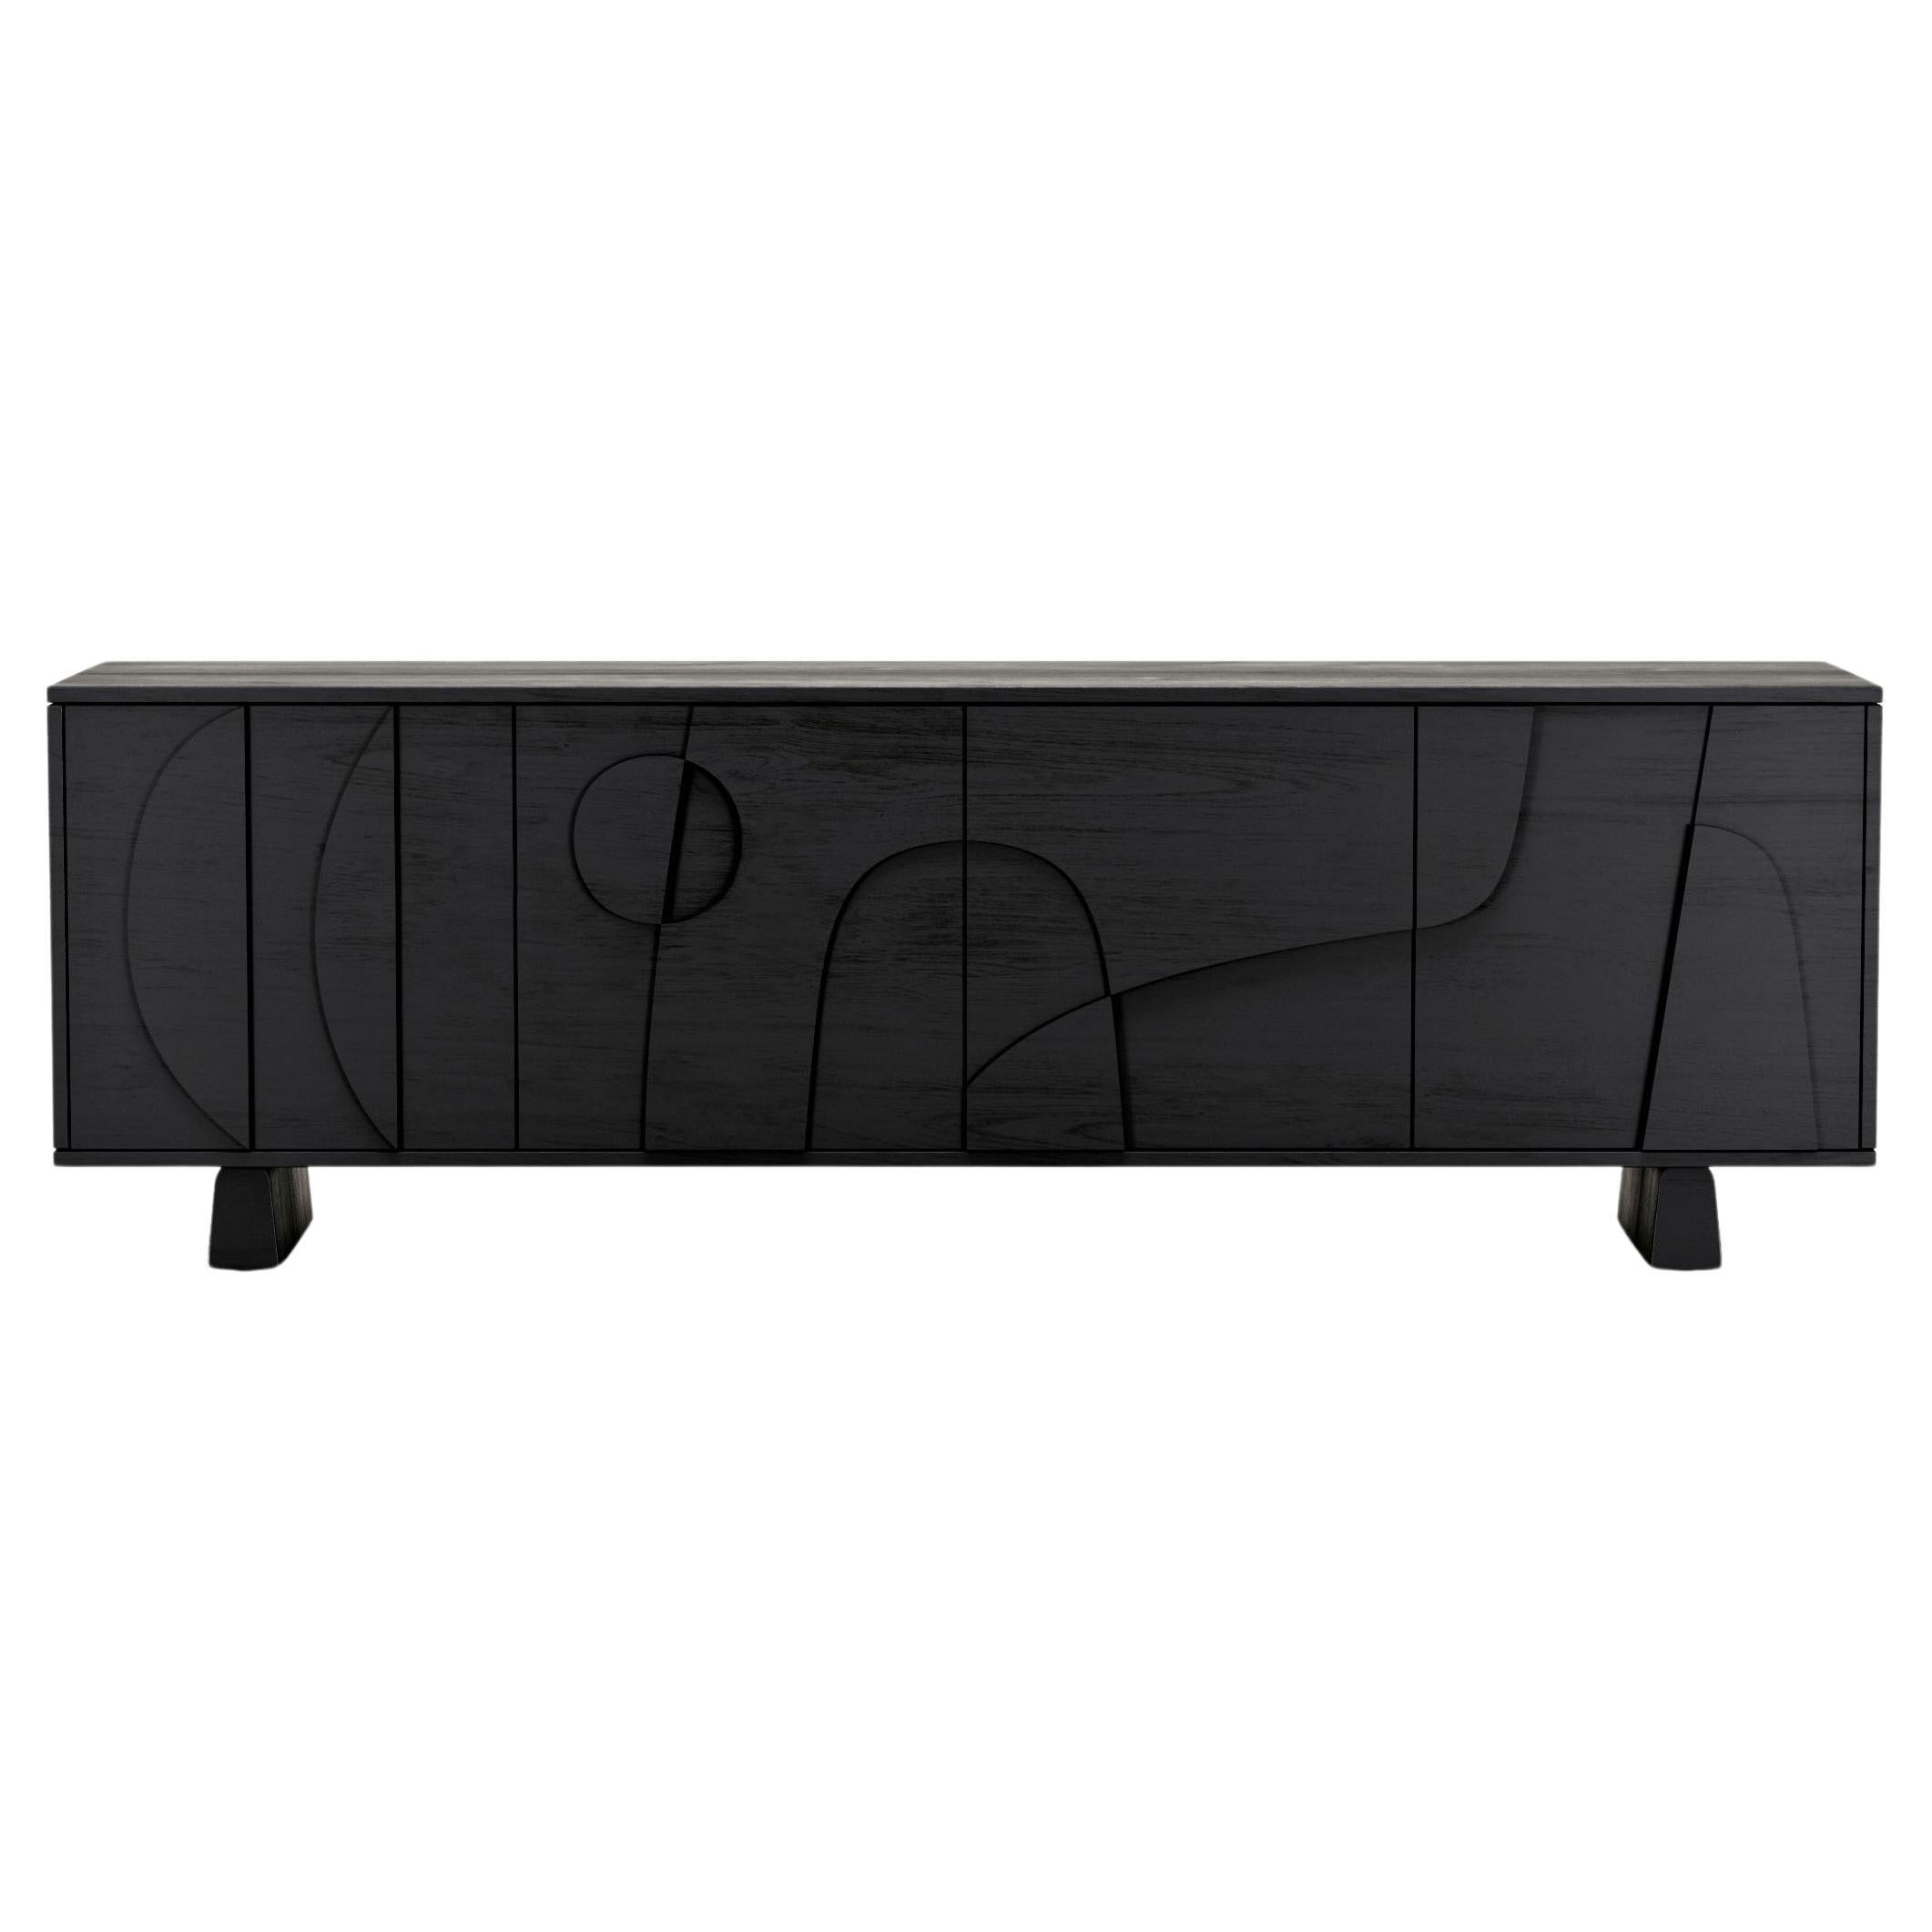 Contemporary 'Wynwood' 4 Sideboard by Man of Parts, Black Oak, Short Legs For Sale